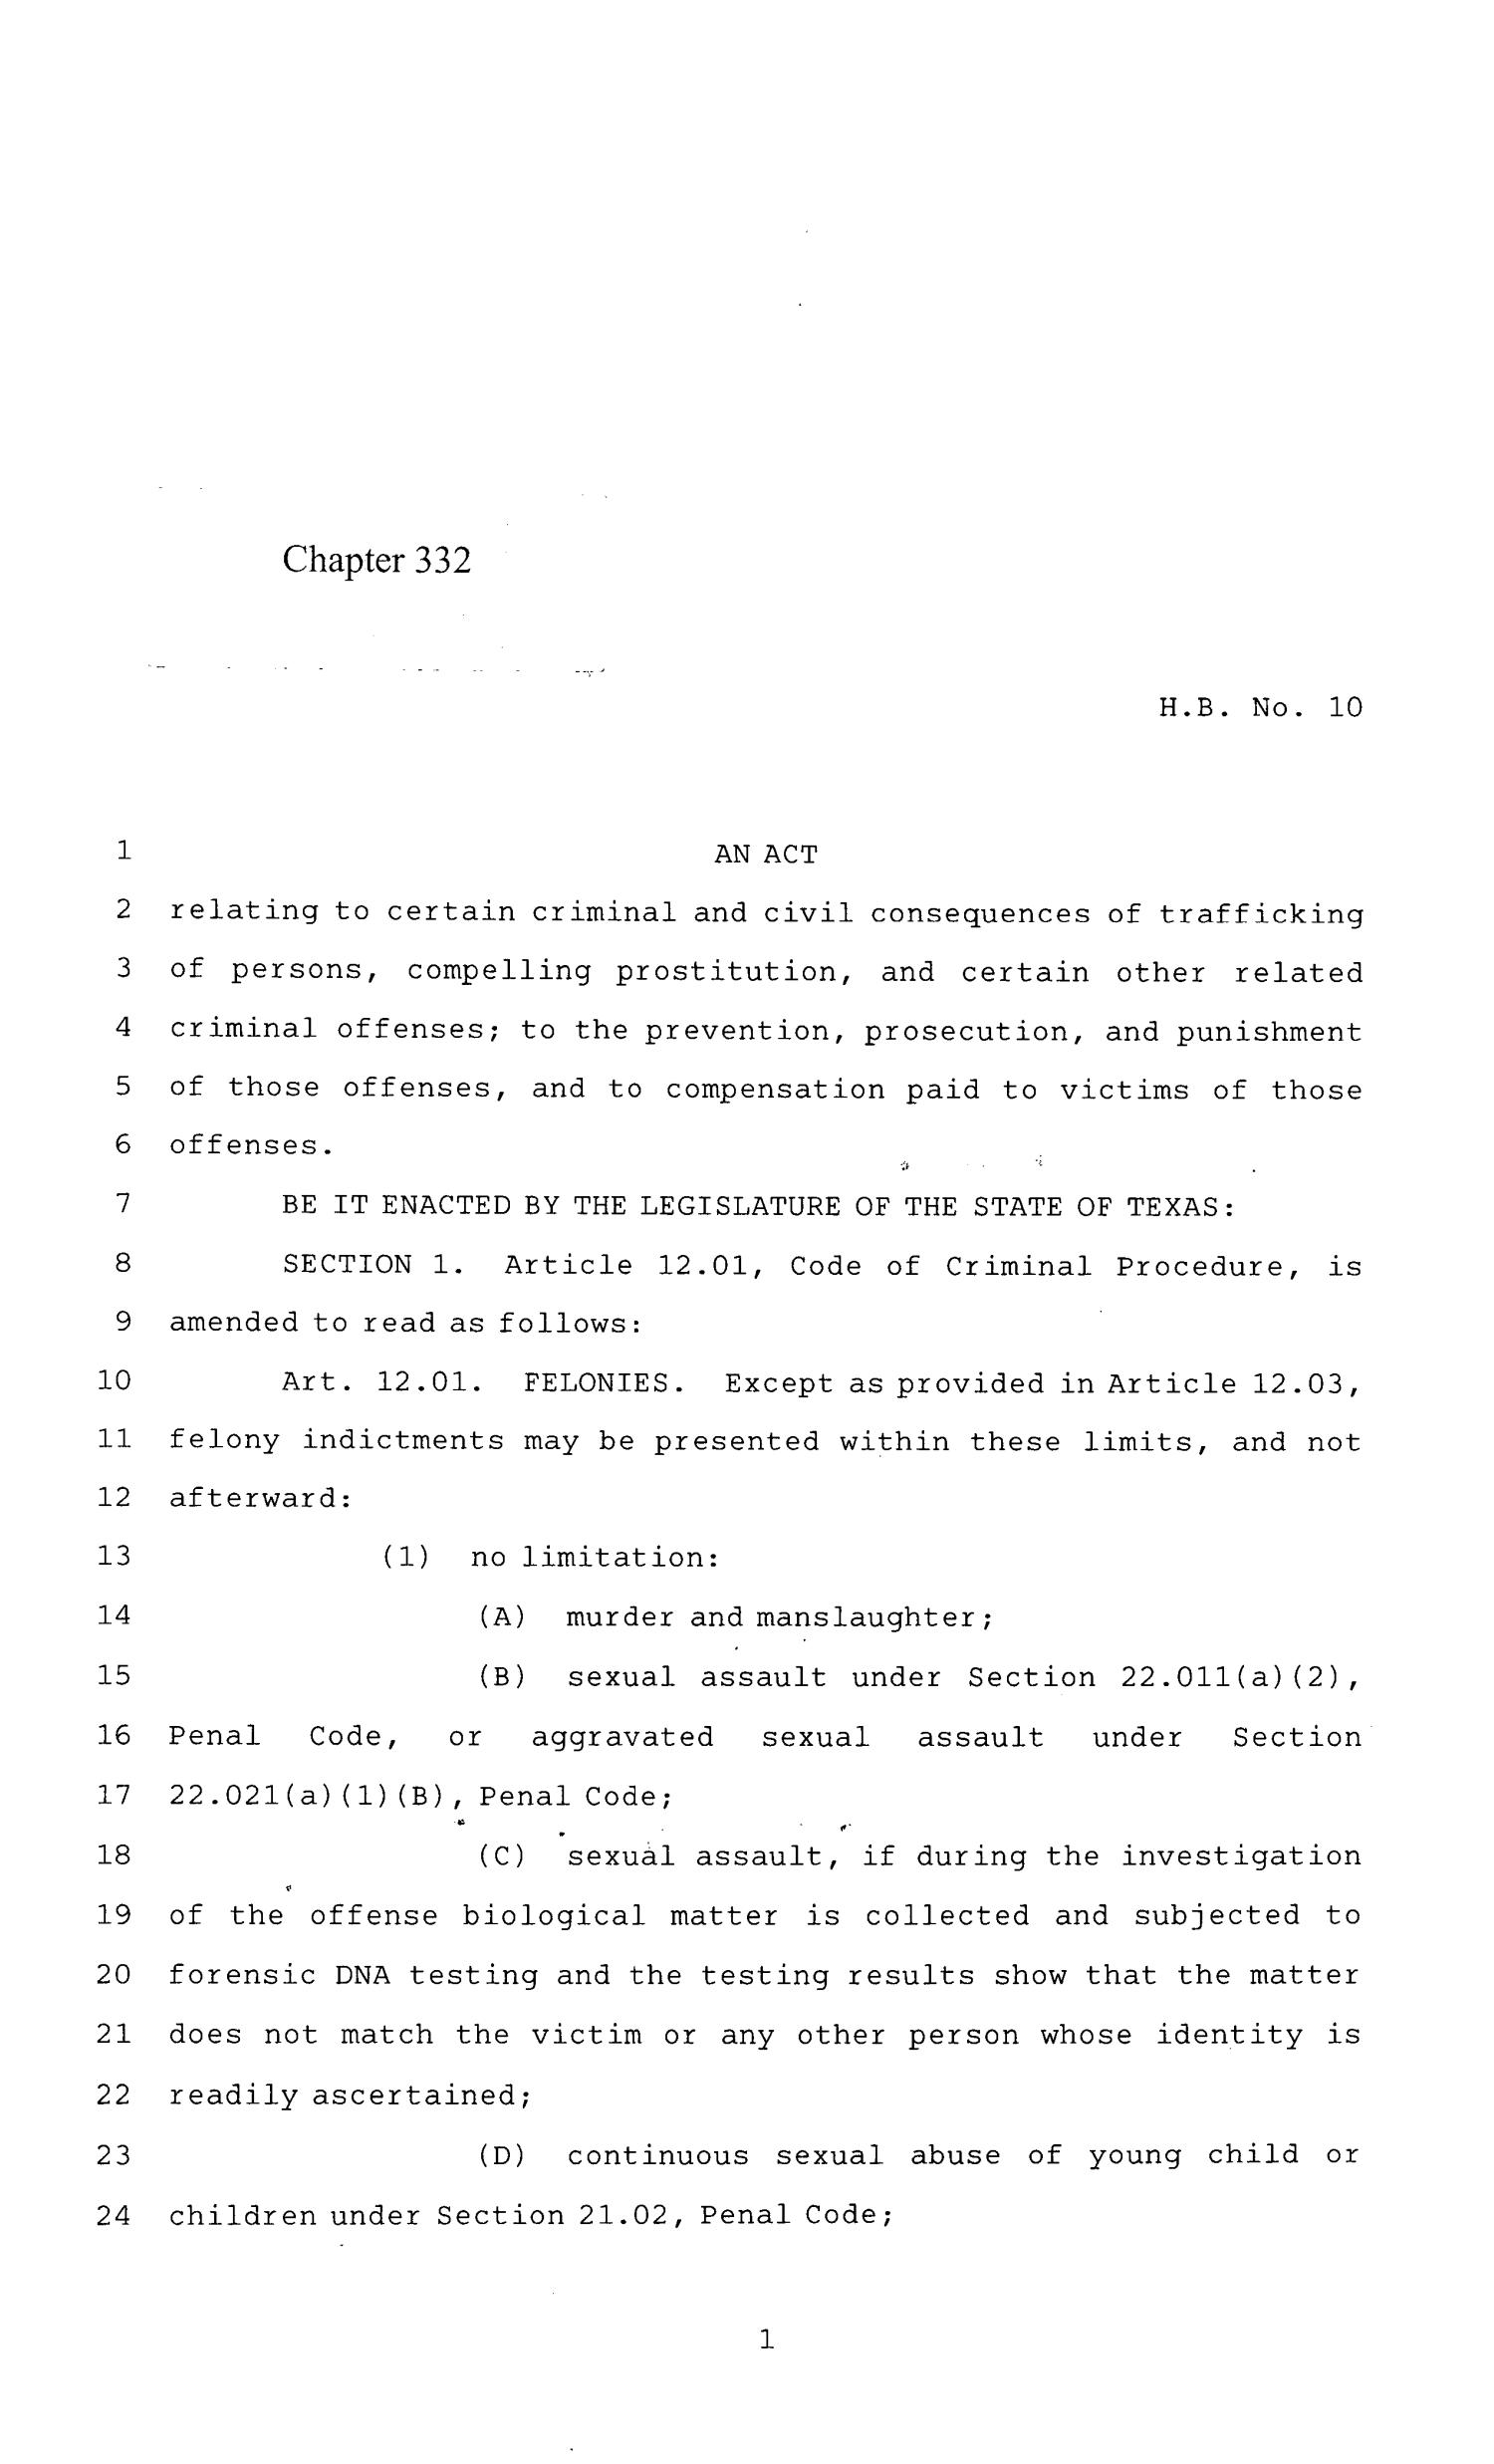 84th Texas Legislature, Regular Session, House Bill 10, Chapter 332
                                                
                                                    [Sequence #]: 1 of 35
                                                